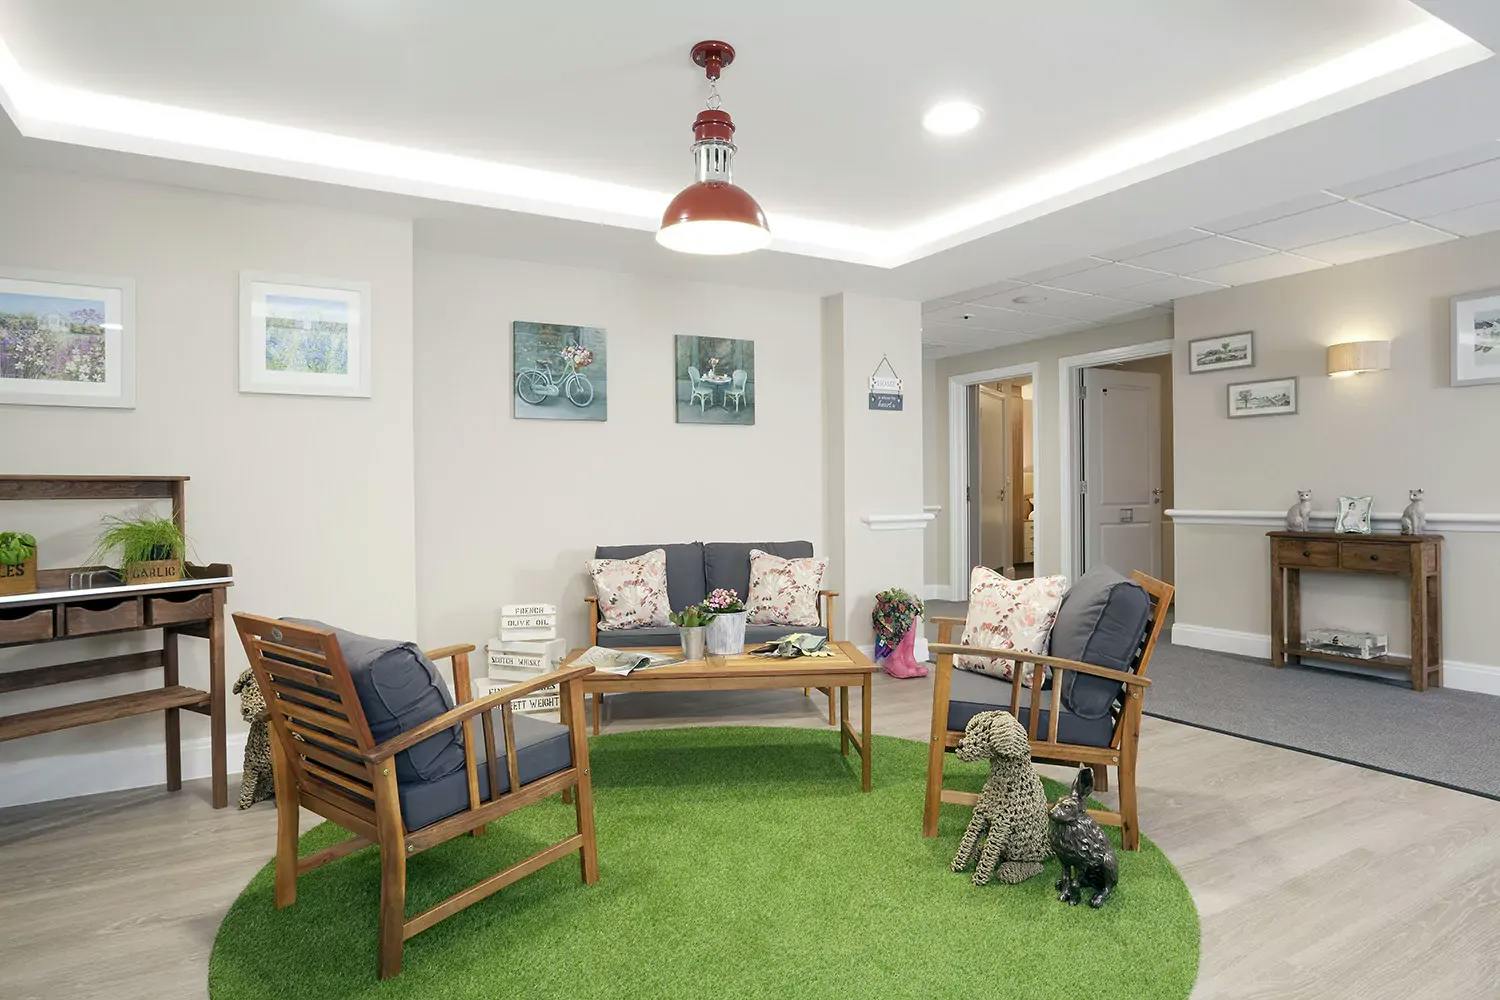 Communal Area at Cherry Wood Grange Care Home in Chelmsford, Essex